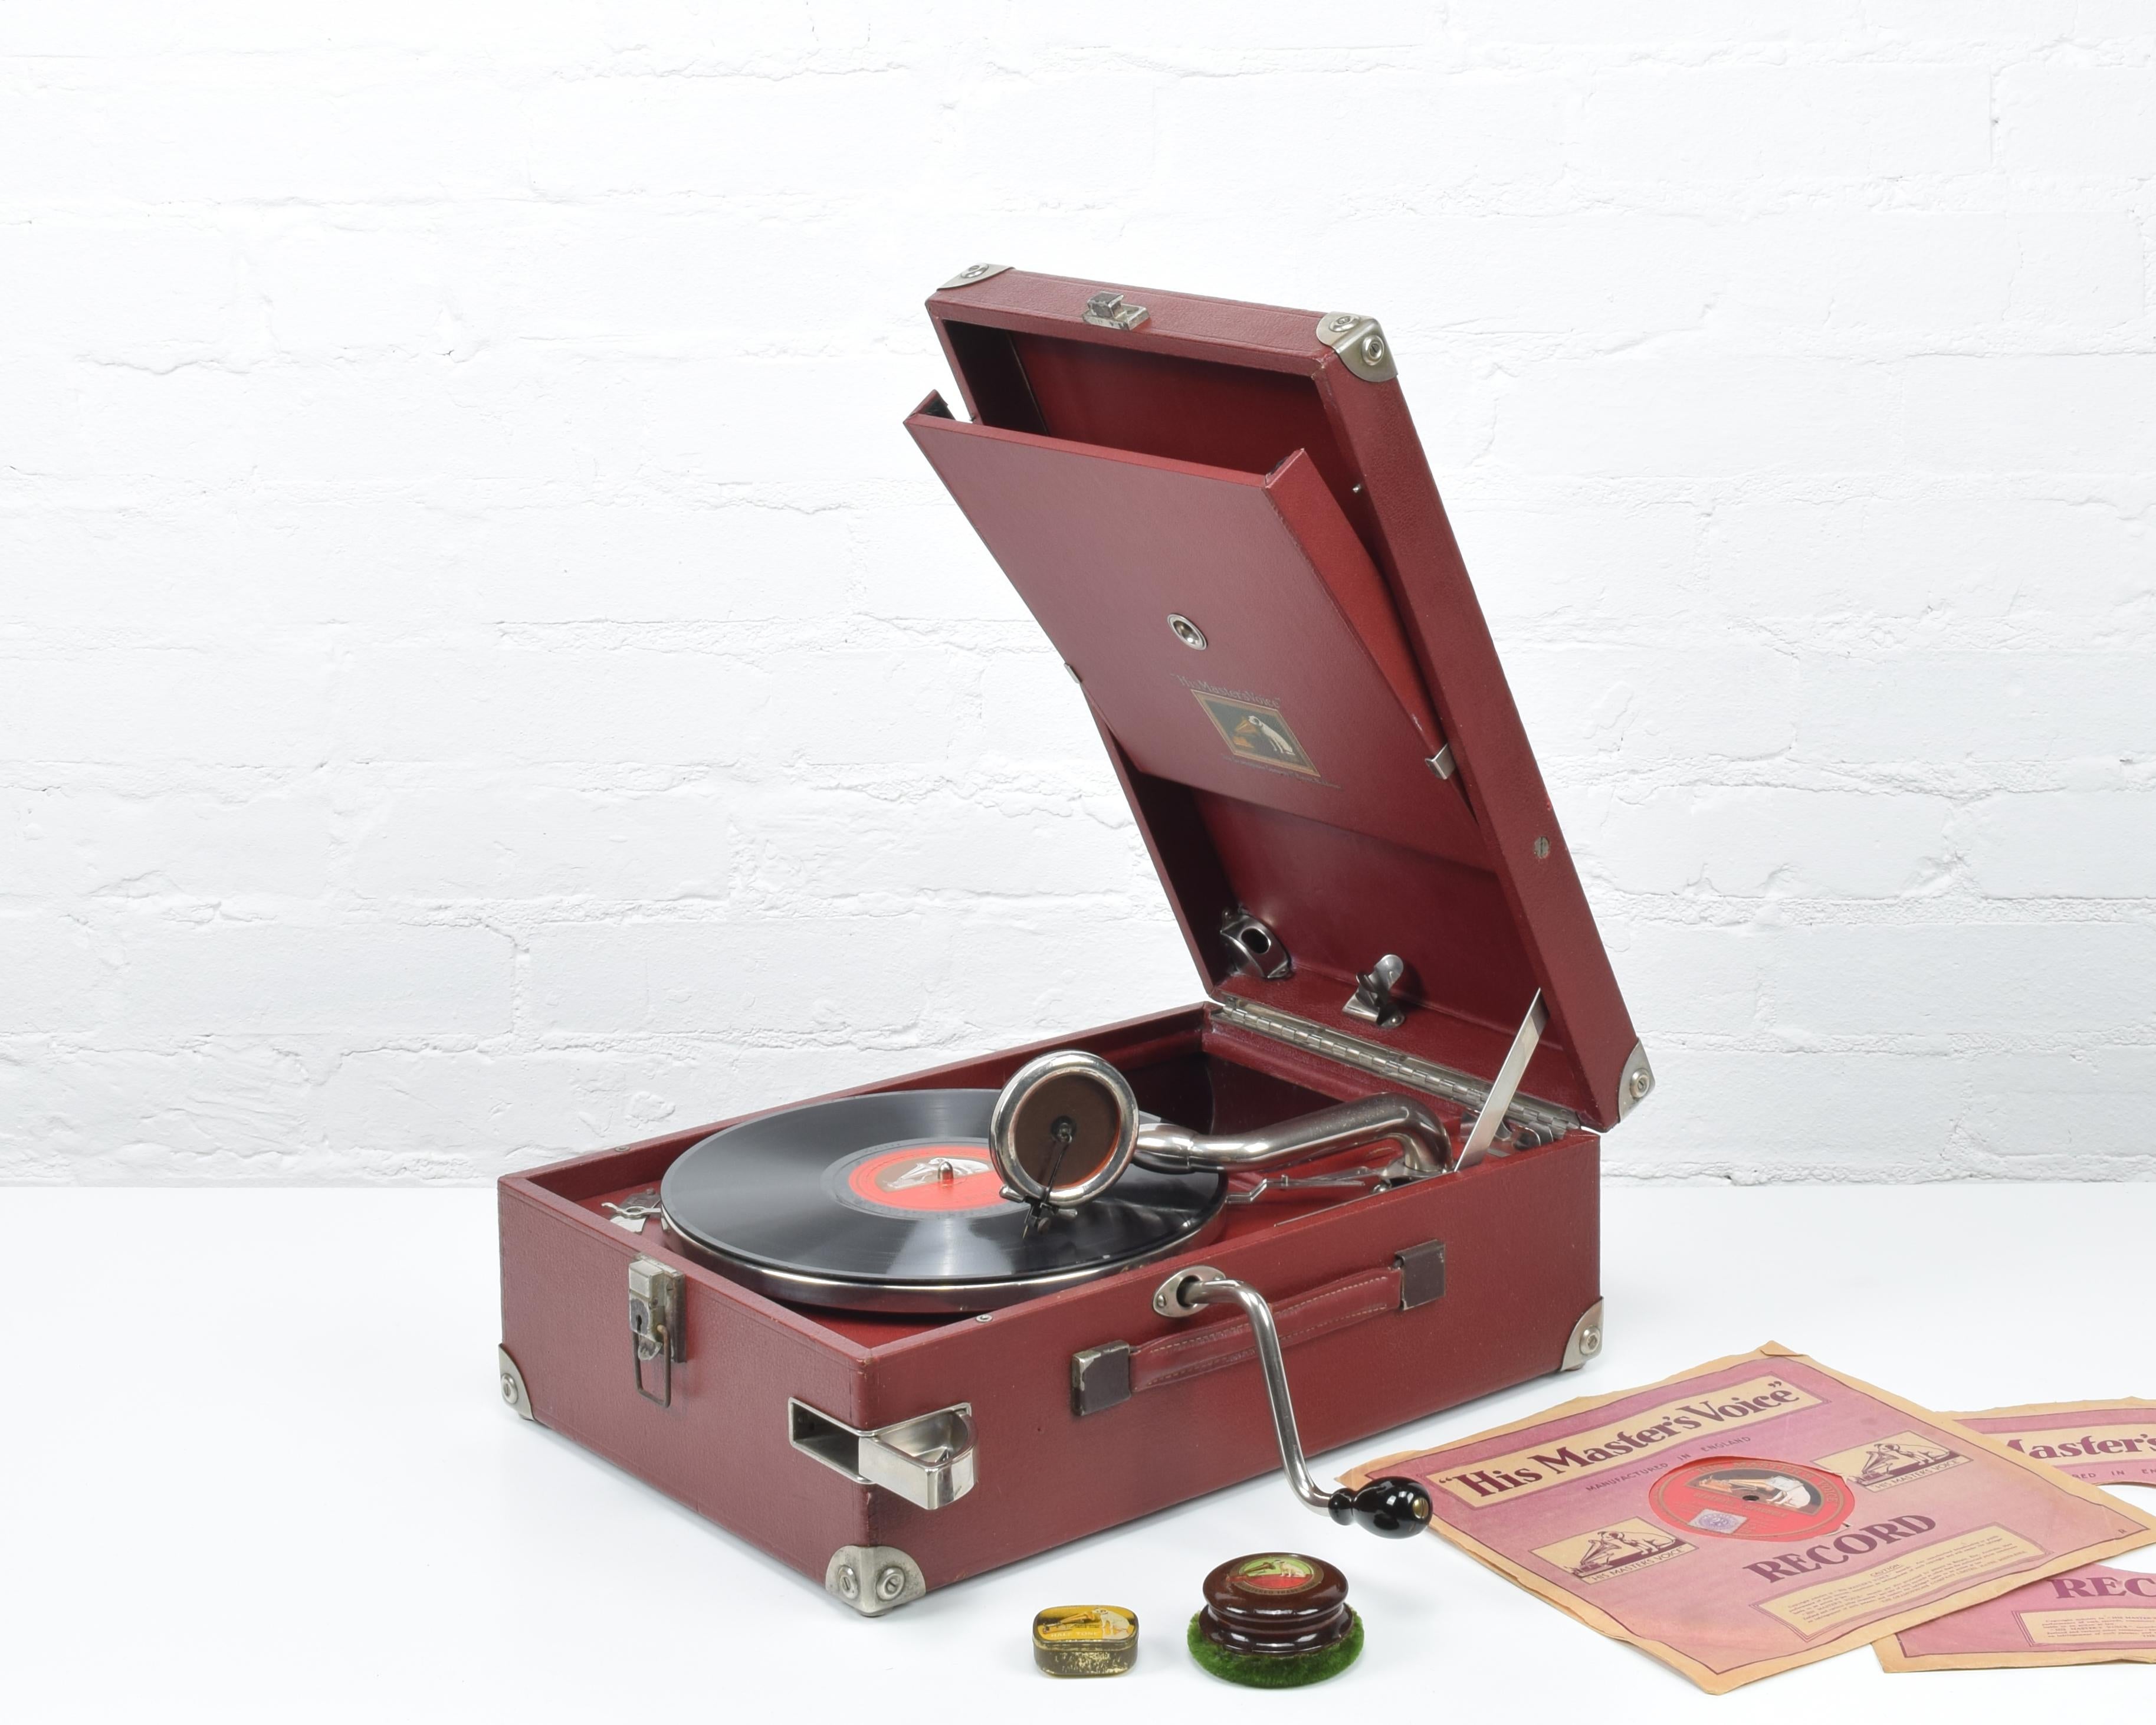 The HMV Model 101 portable Gramophone was originally introduced in about 1925. It was, and is, still considered to be one of the best portable wind-up gramophones ever produced.

Super original condition. Red Rexine leather-cloth, Red metal and